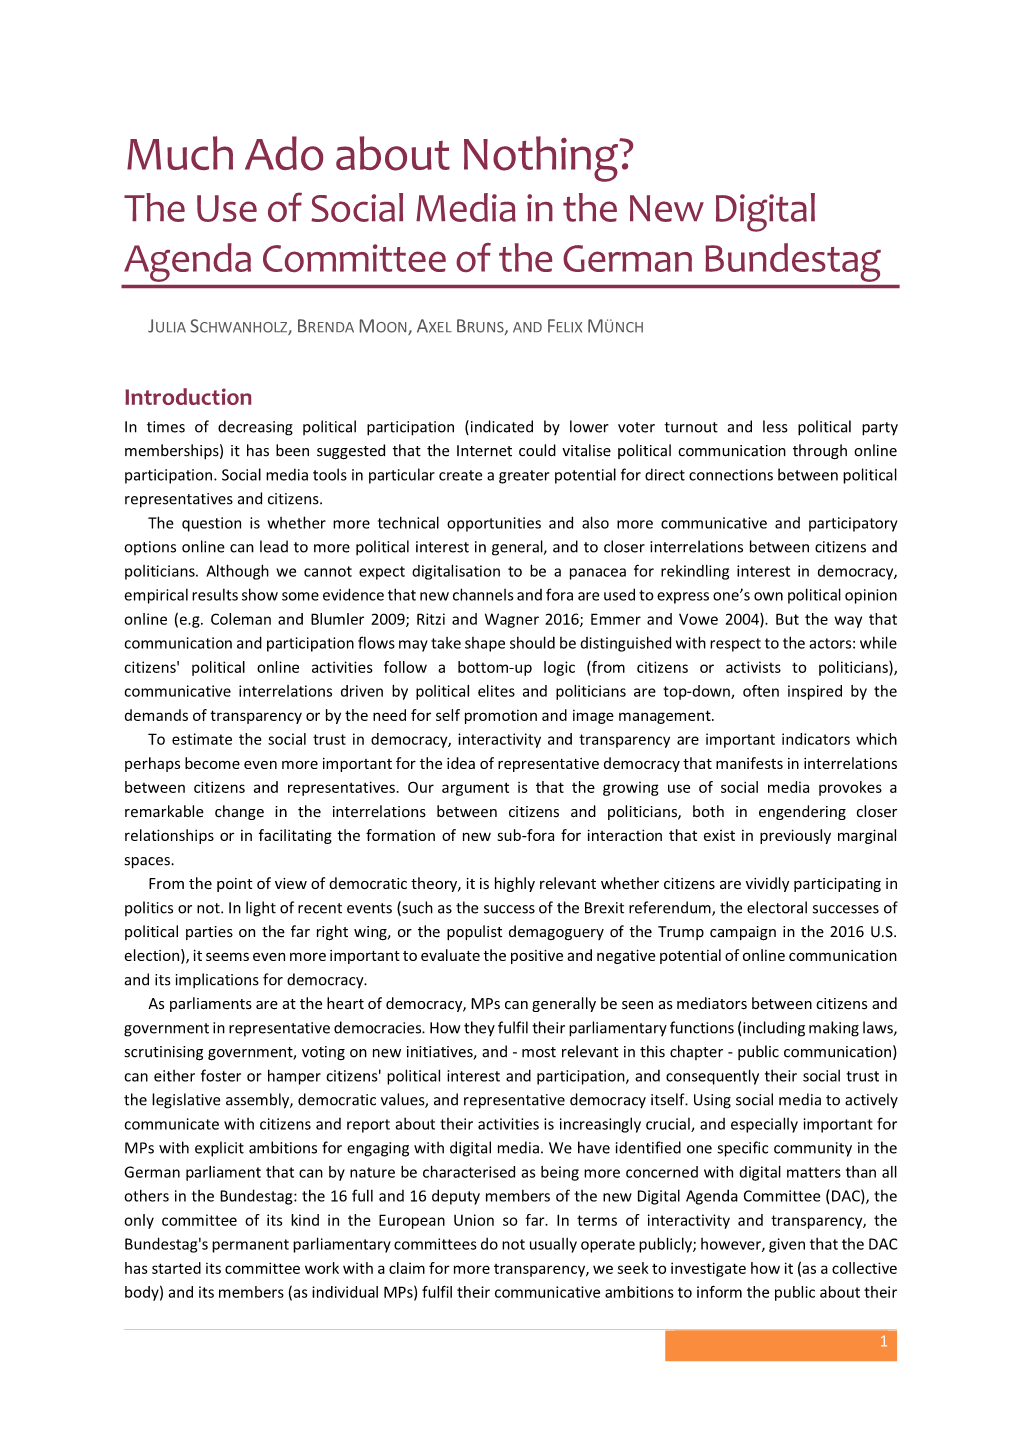 Much Ado About Nothing? the Use of Social Media in the New Digital Agenda Committee of the German Bundestag